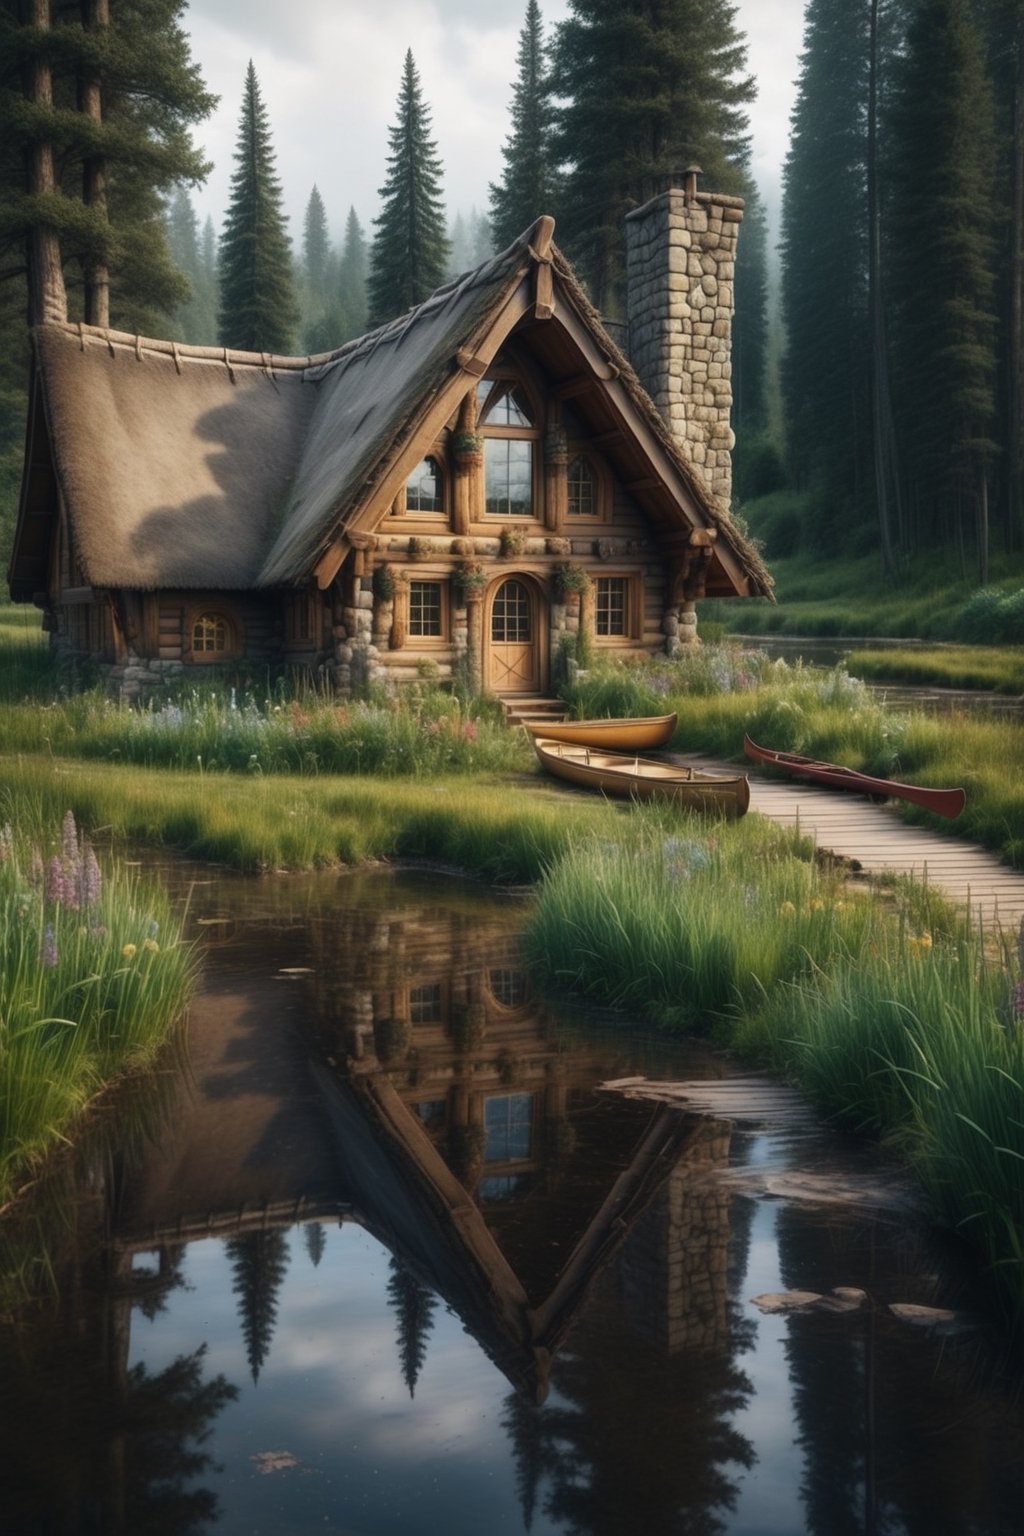 //quality, (masterpiece:1.4), (detailed), ((,best quality,)),//a cozy log cabin, medieval fantasy vibe, wild flowers, tall grass, pathway, canoe, river, overcast weather, tress, pine, sequia forest, mud, puddle reflection, (snowfall outside), built over a cliff, hobbit house